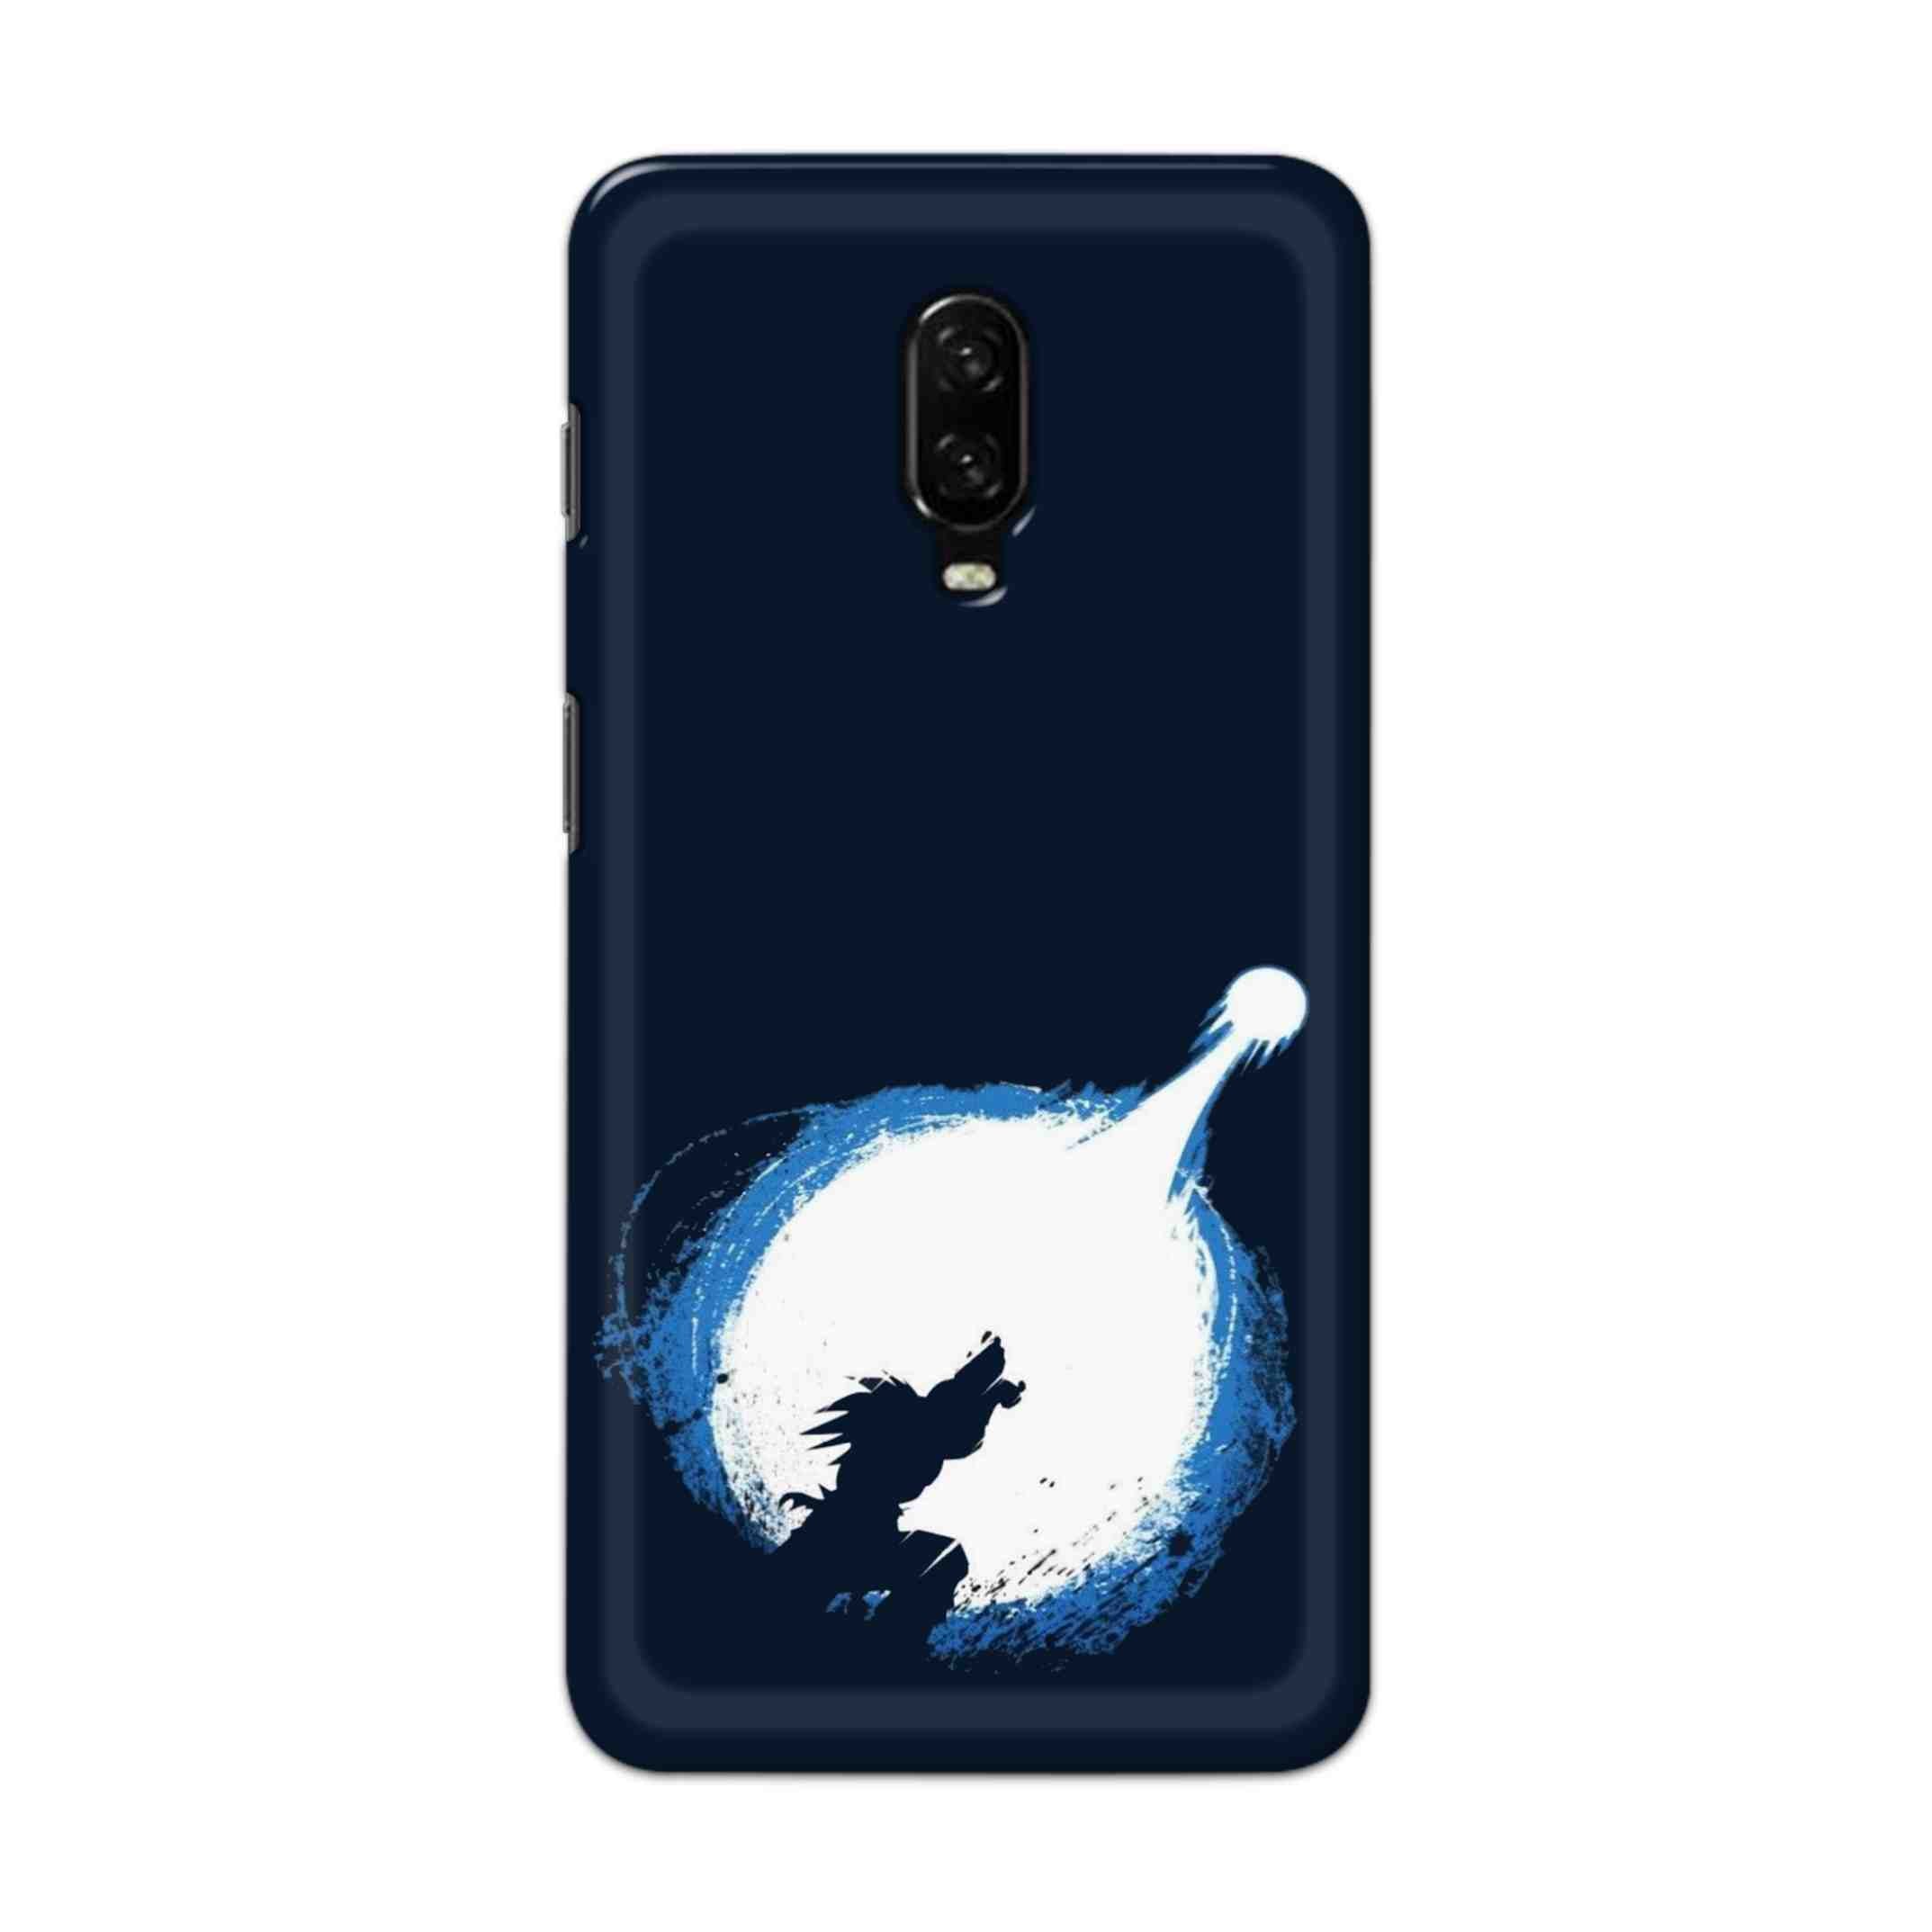 Buy Goku Power Hard Back Mobile Phone Case Cover For OnePlus 6T Online